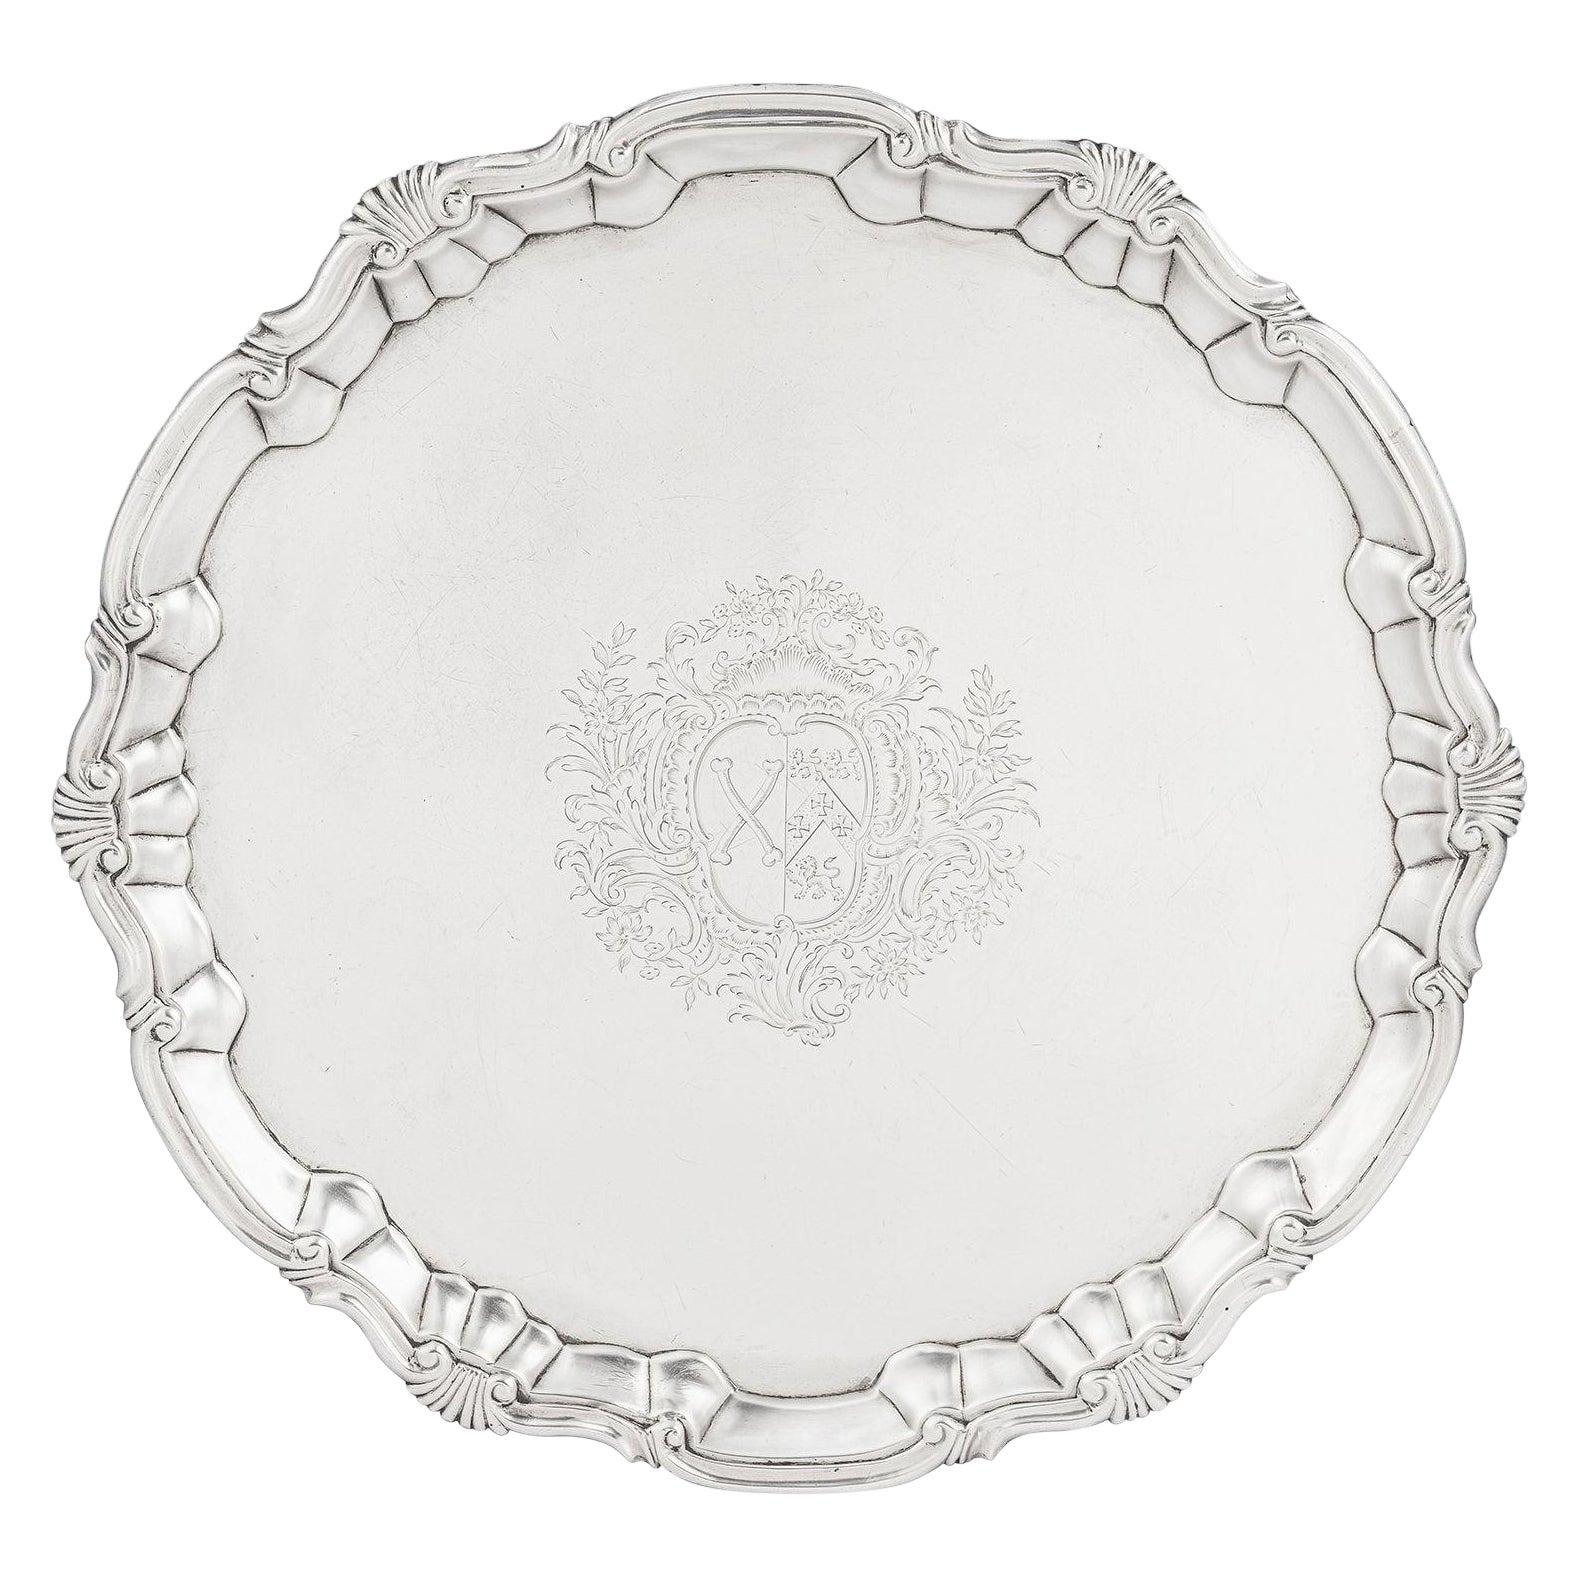 George II Salver Made in London by William Peaston, 1752